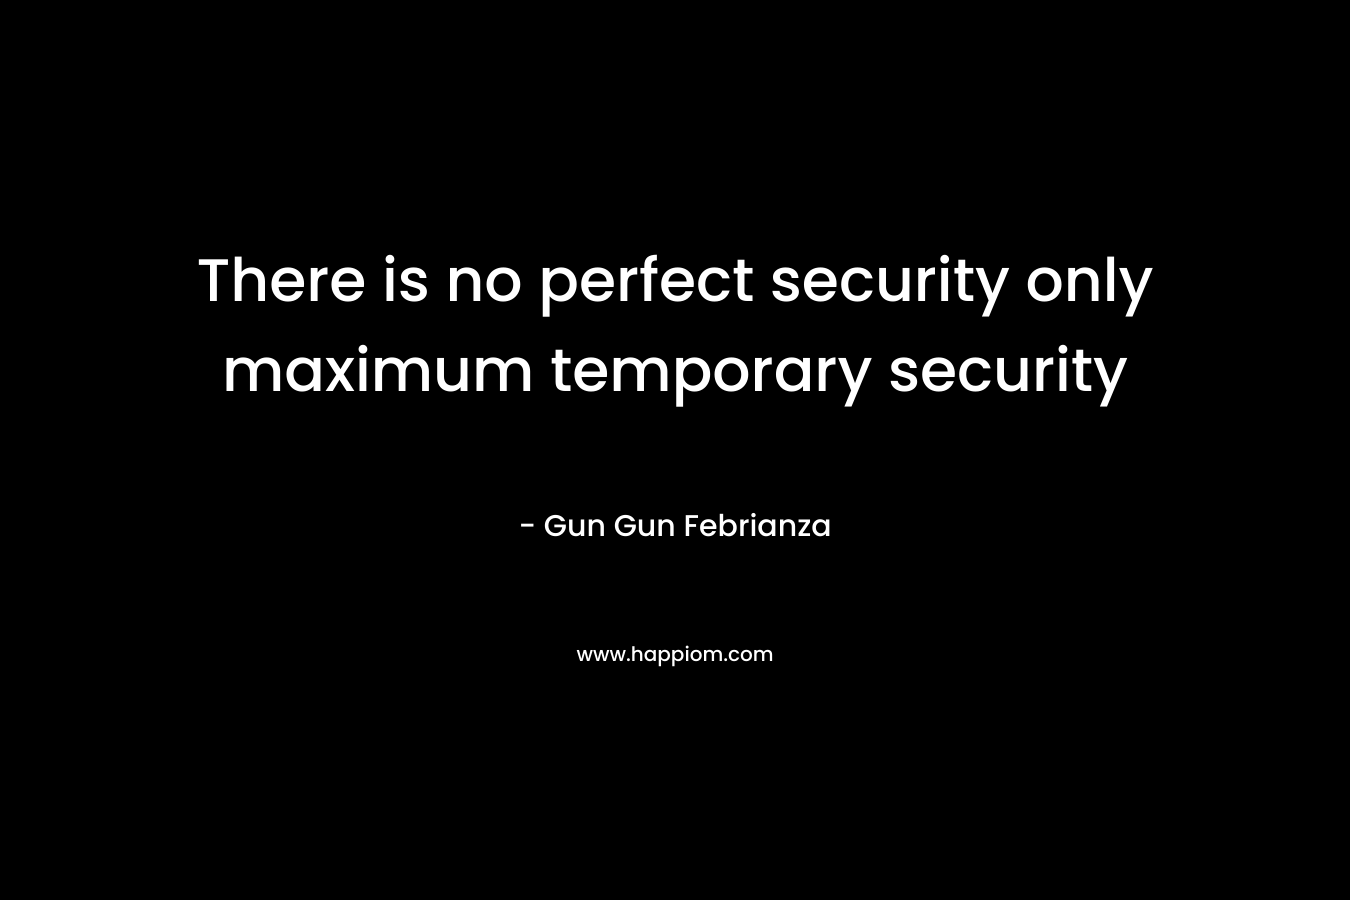 There is no perfect security only maximum temporary security